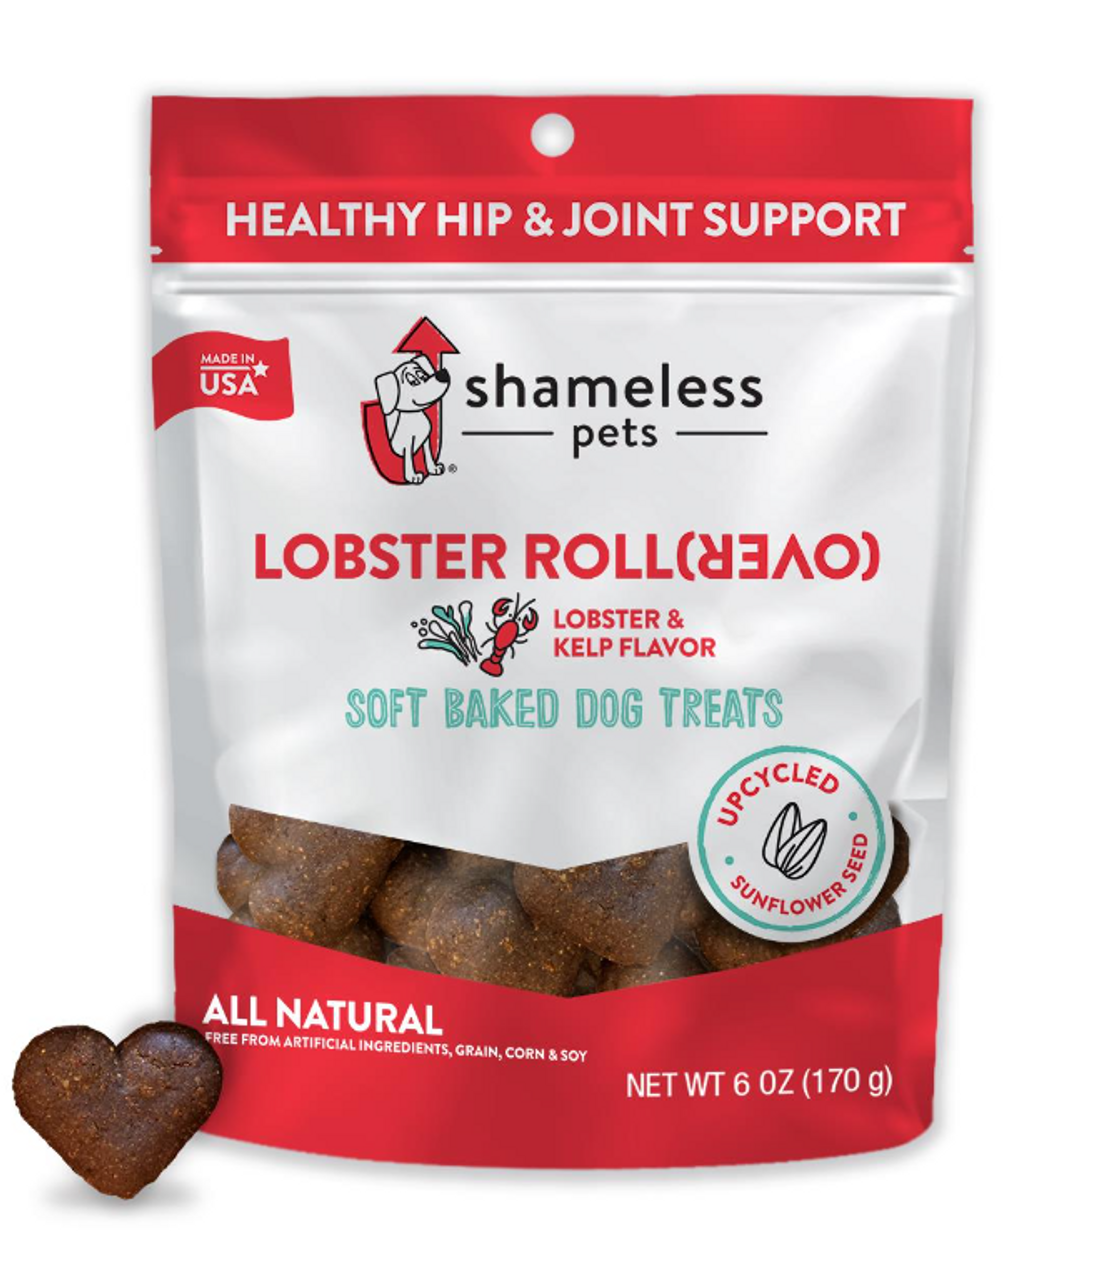 Shameless Pets Lobster Rollover Soft-Baked Dog Treats, 6oz. - CountryMax